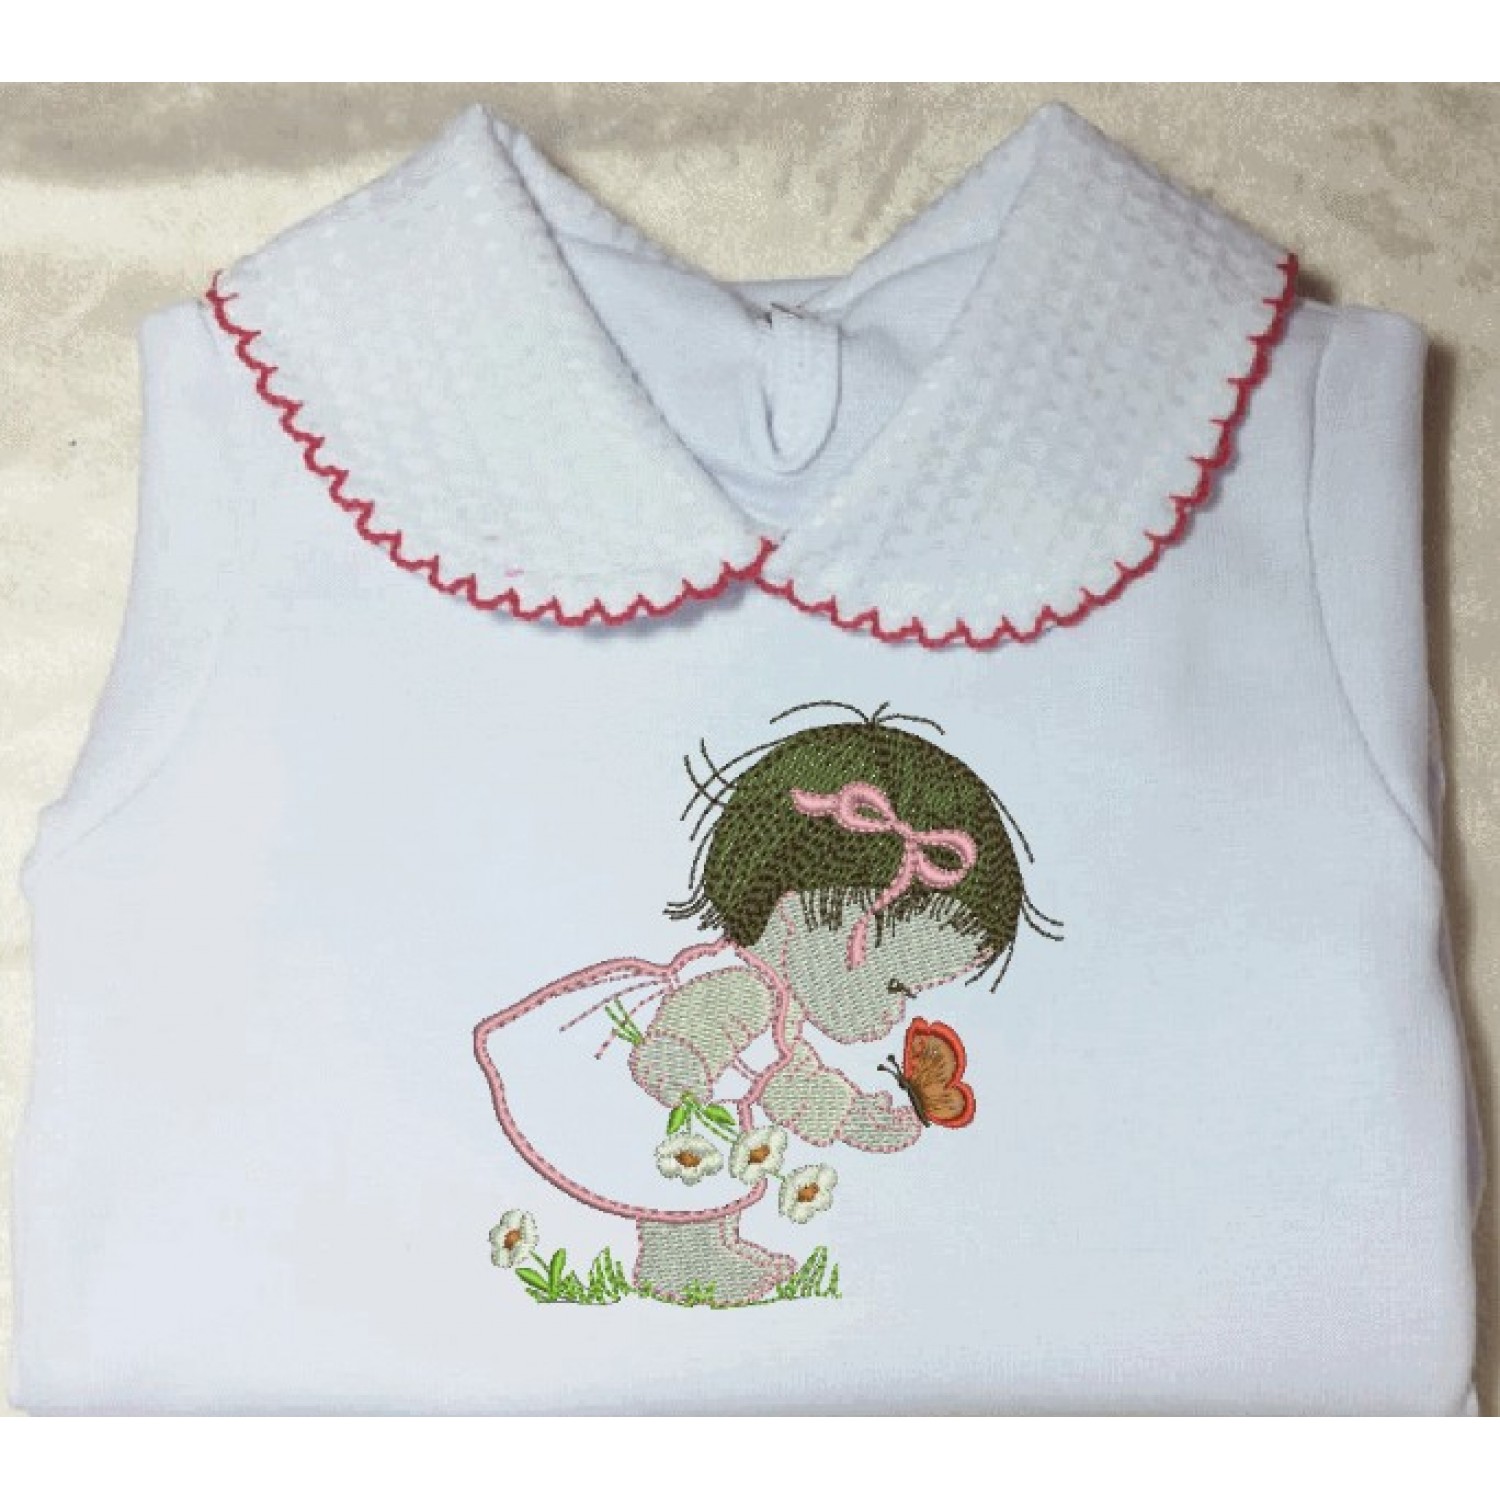 Little Girl Embroidery Design